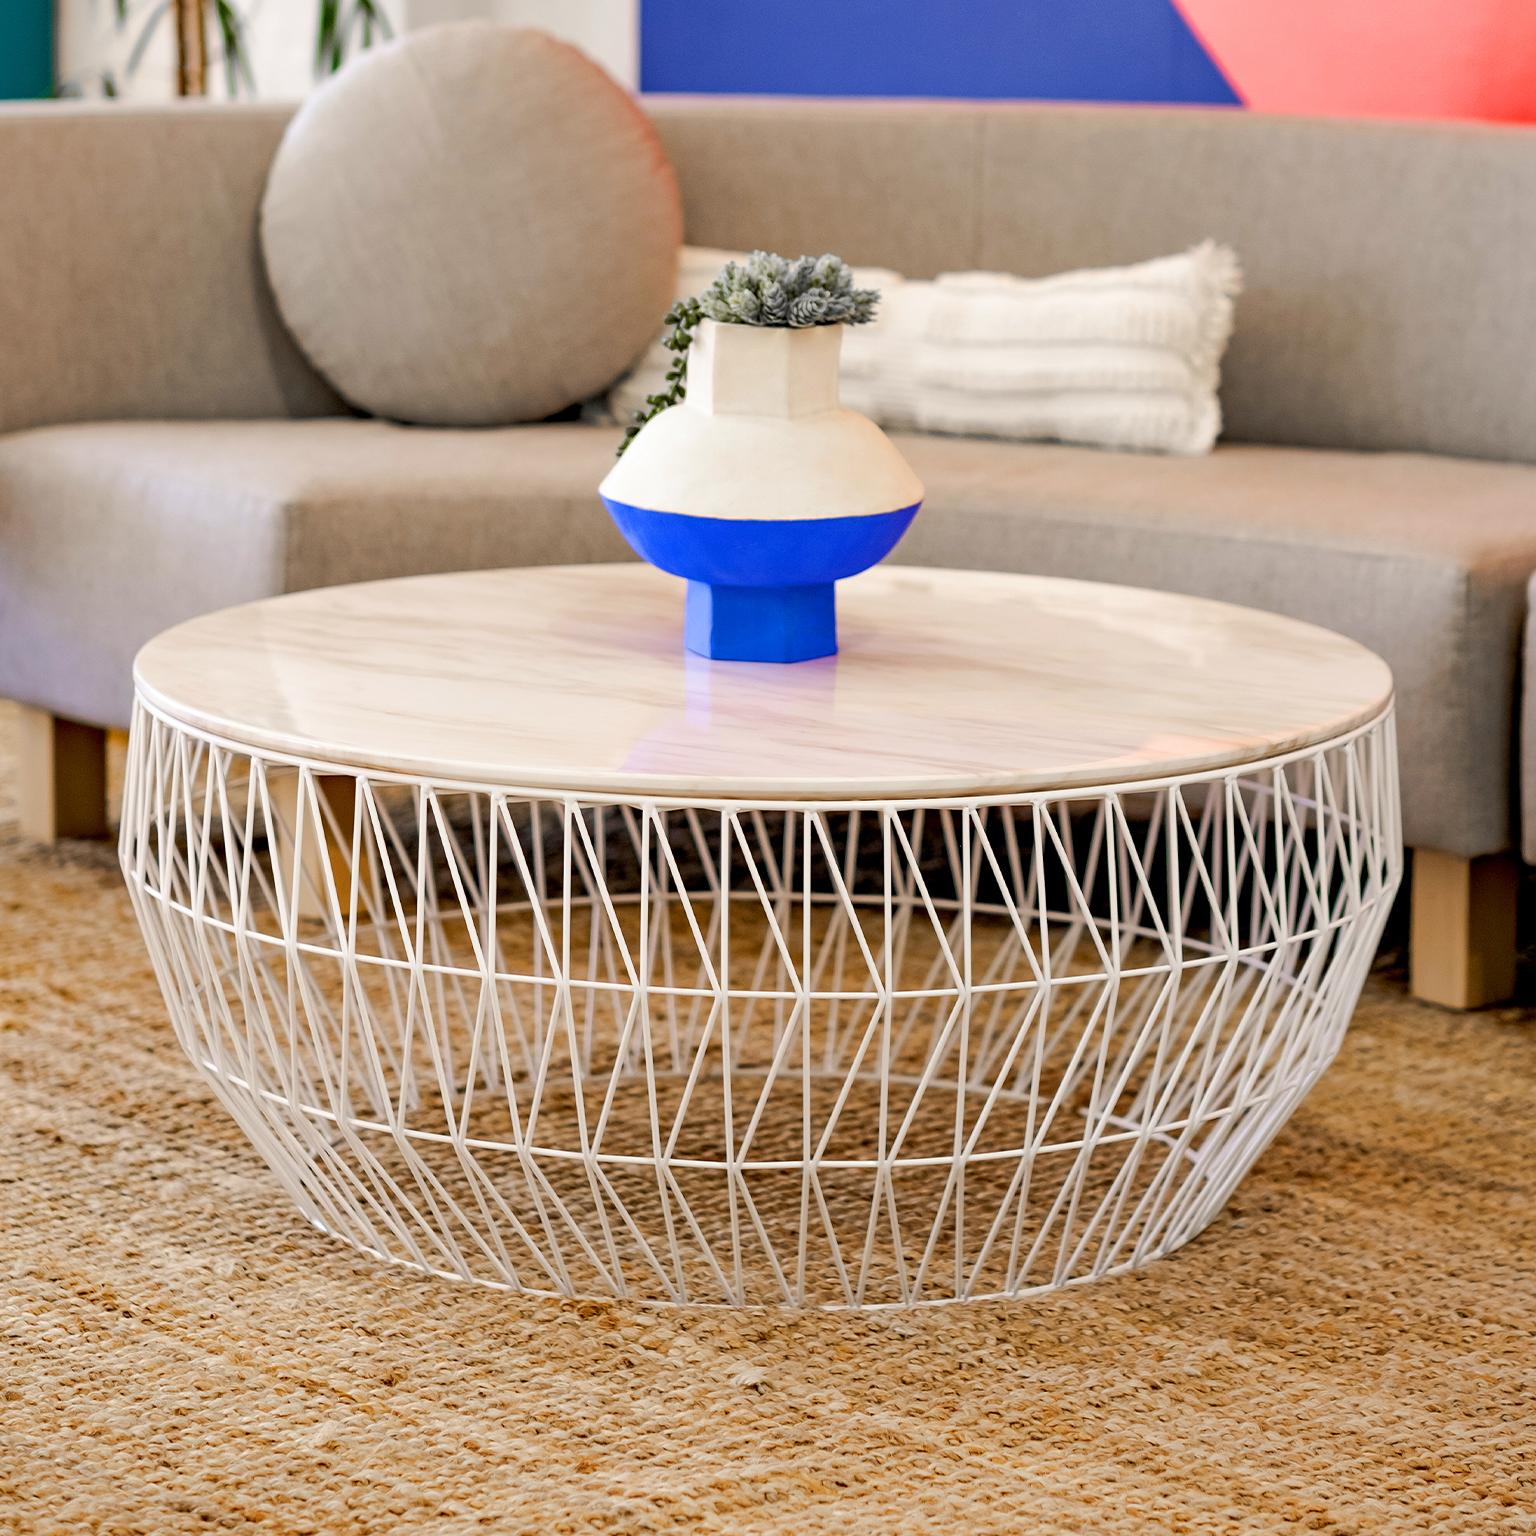 Bend Goods wire furniture
Inspired by the modern pattern of the Lucy chair with an elegant wire arrangement that doesn't overwhelm a simple space, the coffee table keeps it light. Modern contemporary design with an array of optional tops. Gold and